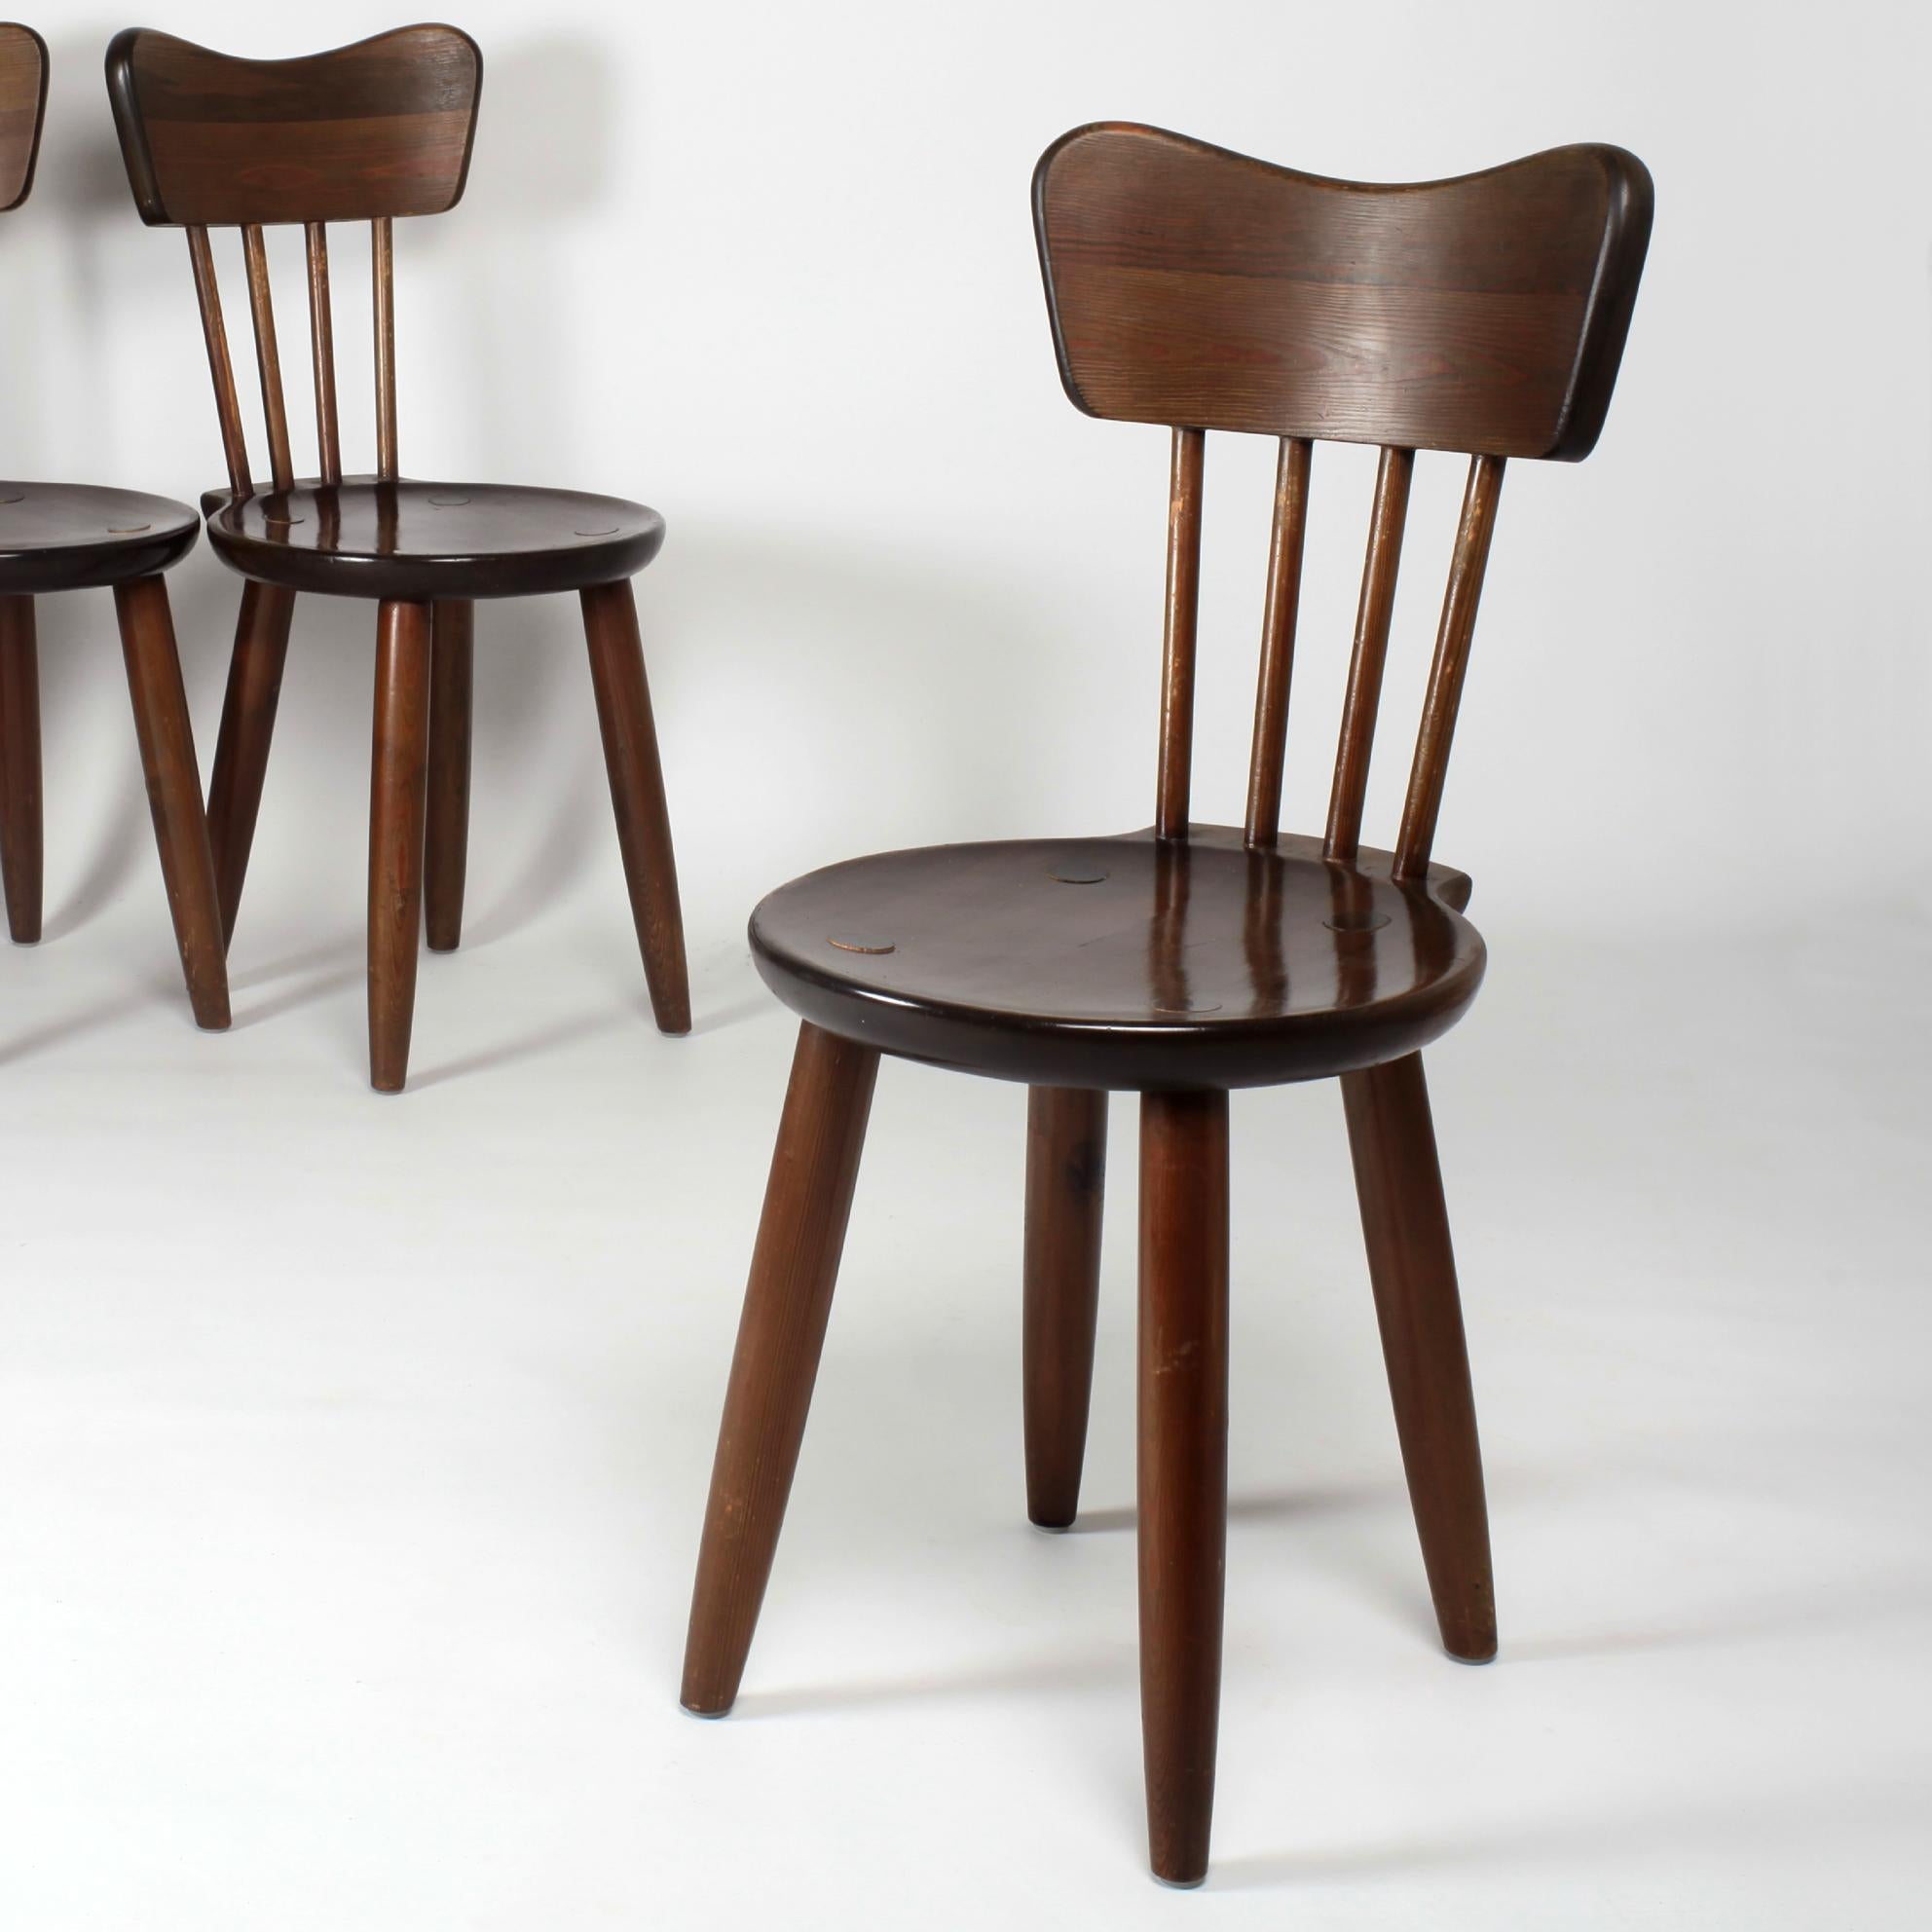 Swedish Chairs in Solid Pine Wood 1930 by Torsten Claeson For Sale 3